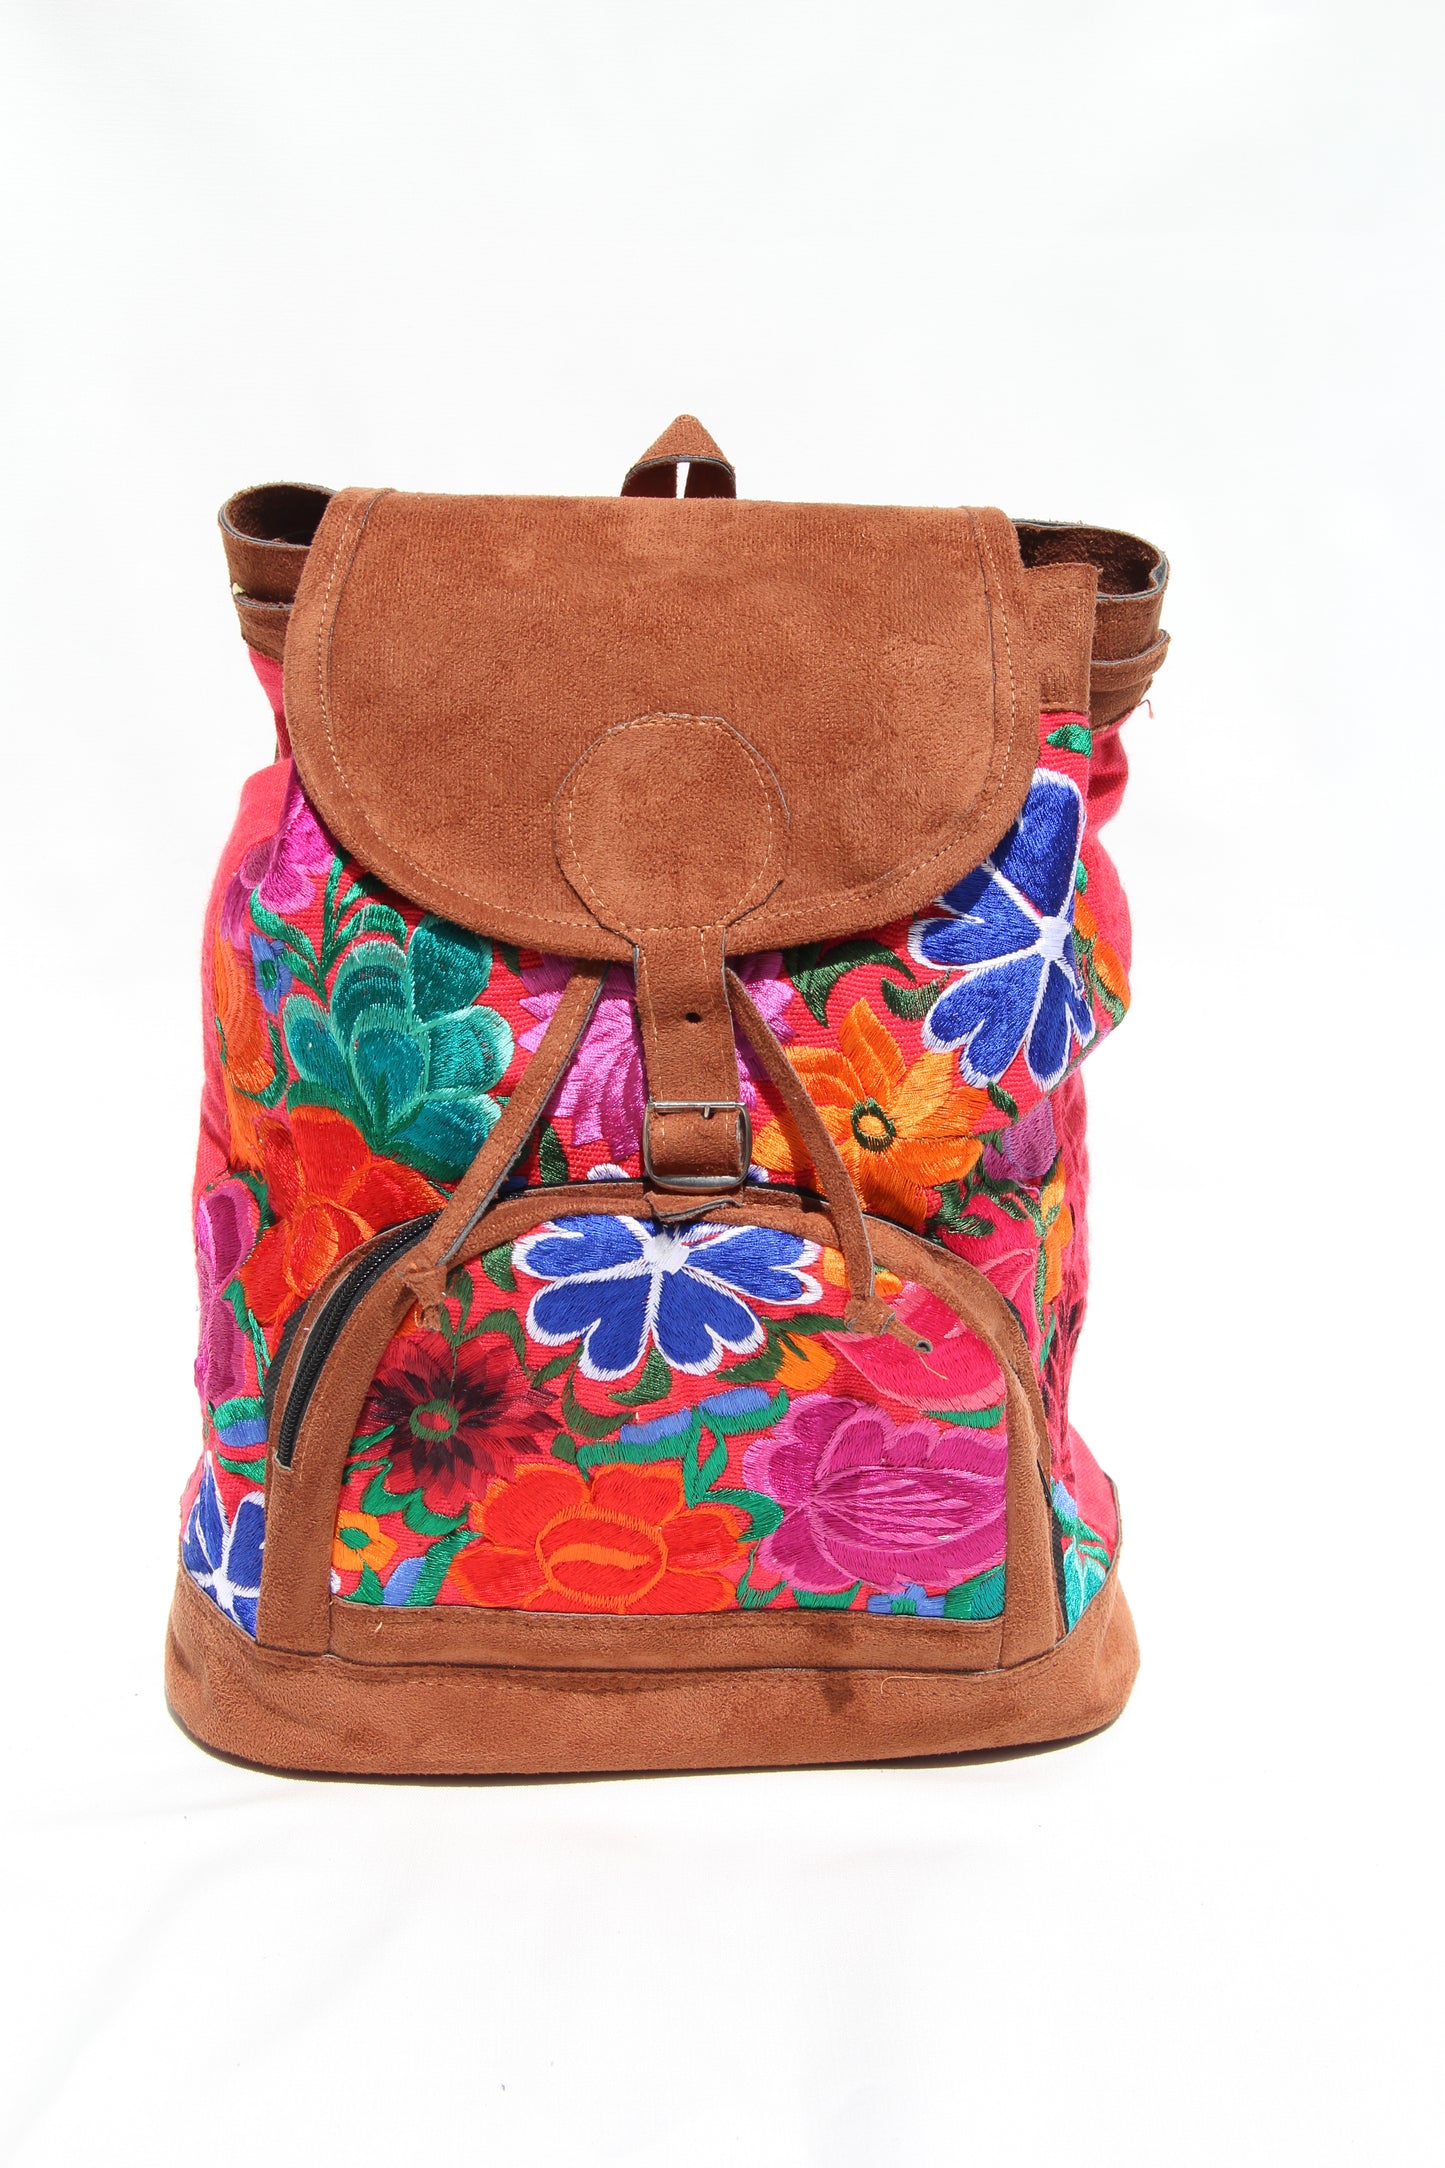 colorful huipil floral embroidery backpack coral woven fabric and faux suede contrast with adjustable straps and front buckle closure with front zipper pocket the prefect travel, hiking or beach bag unique bag great for back to school take this bag on your next destination boho bag and hippie style bag a great standout accessories made in Guatemala